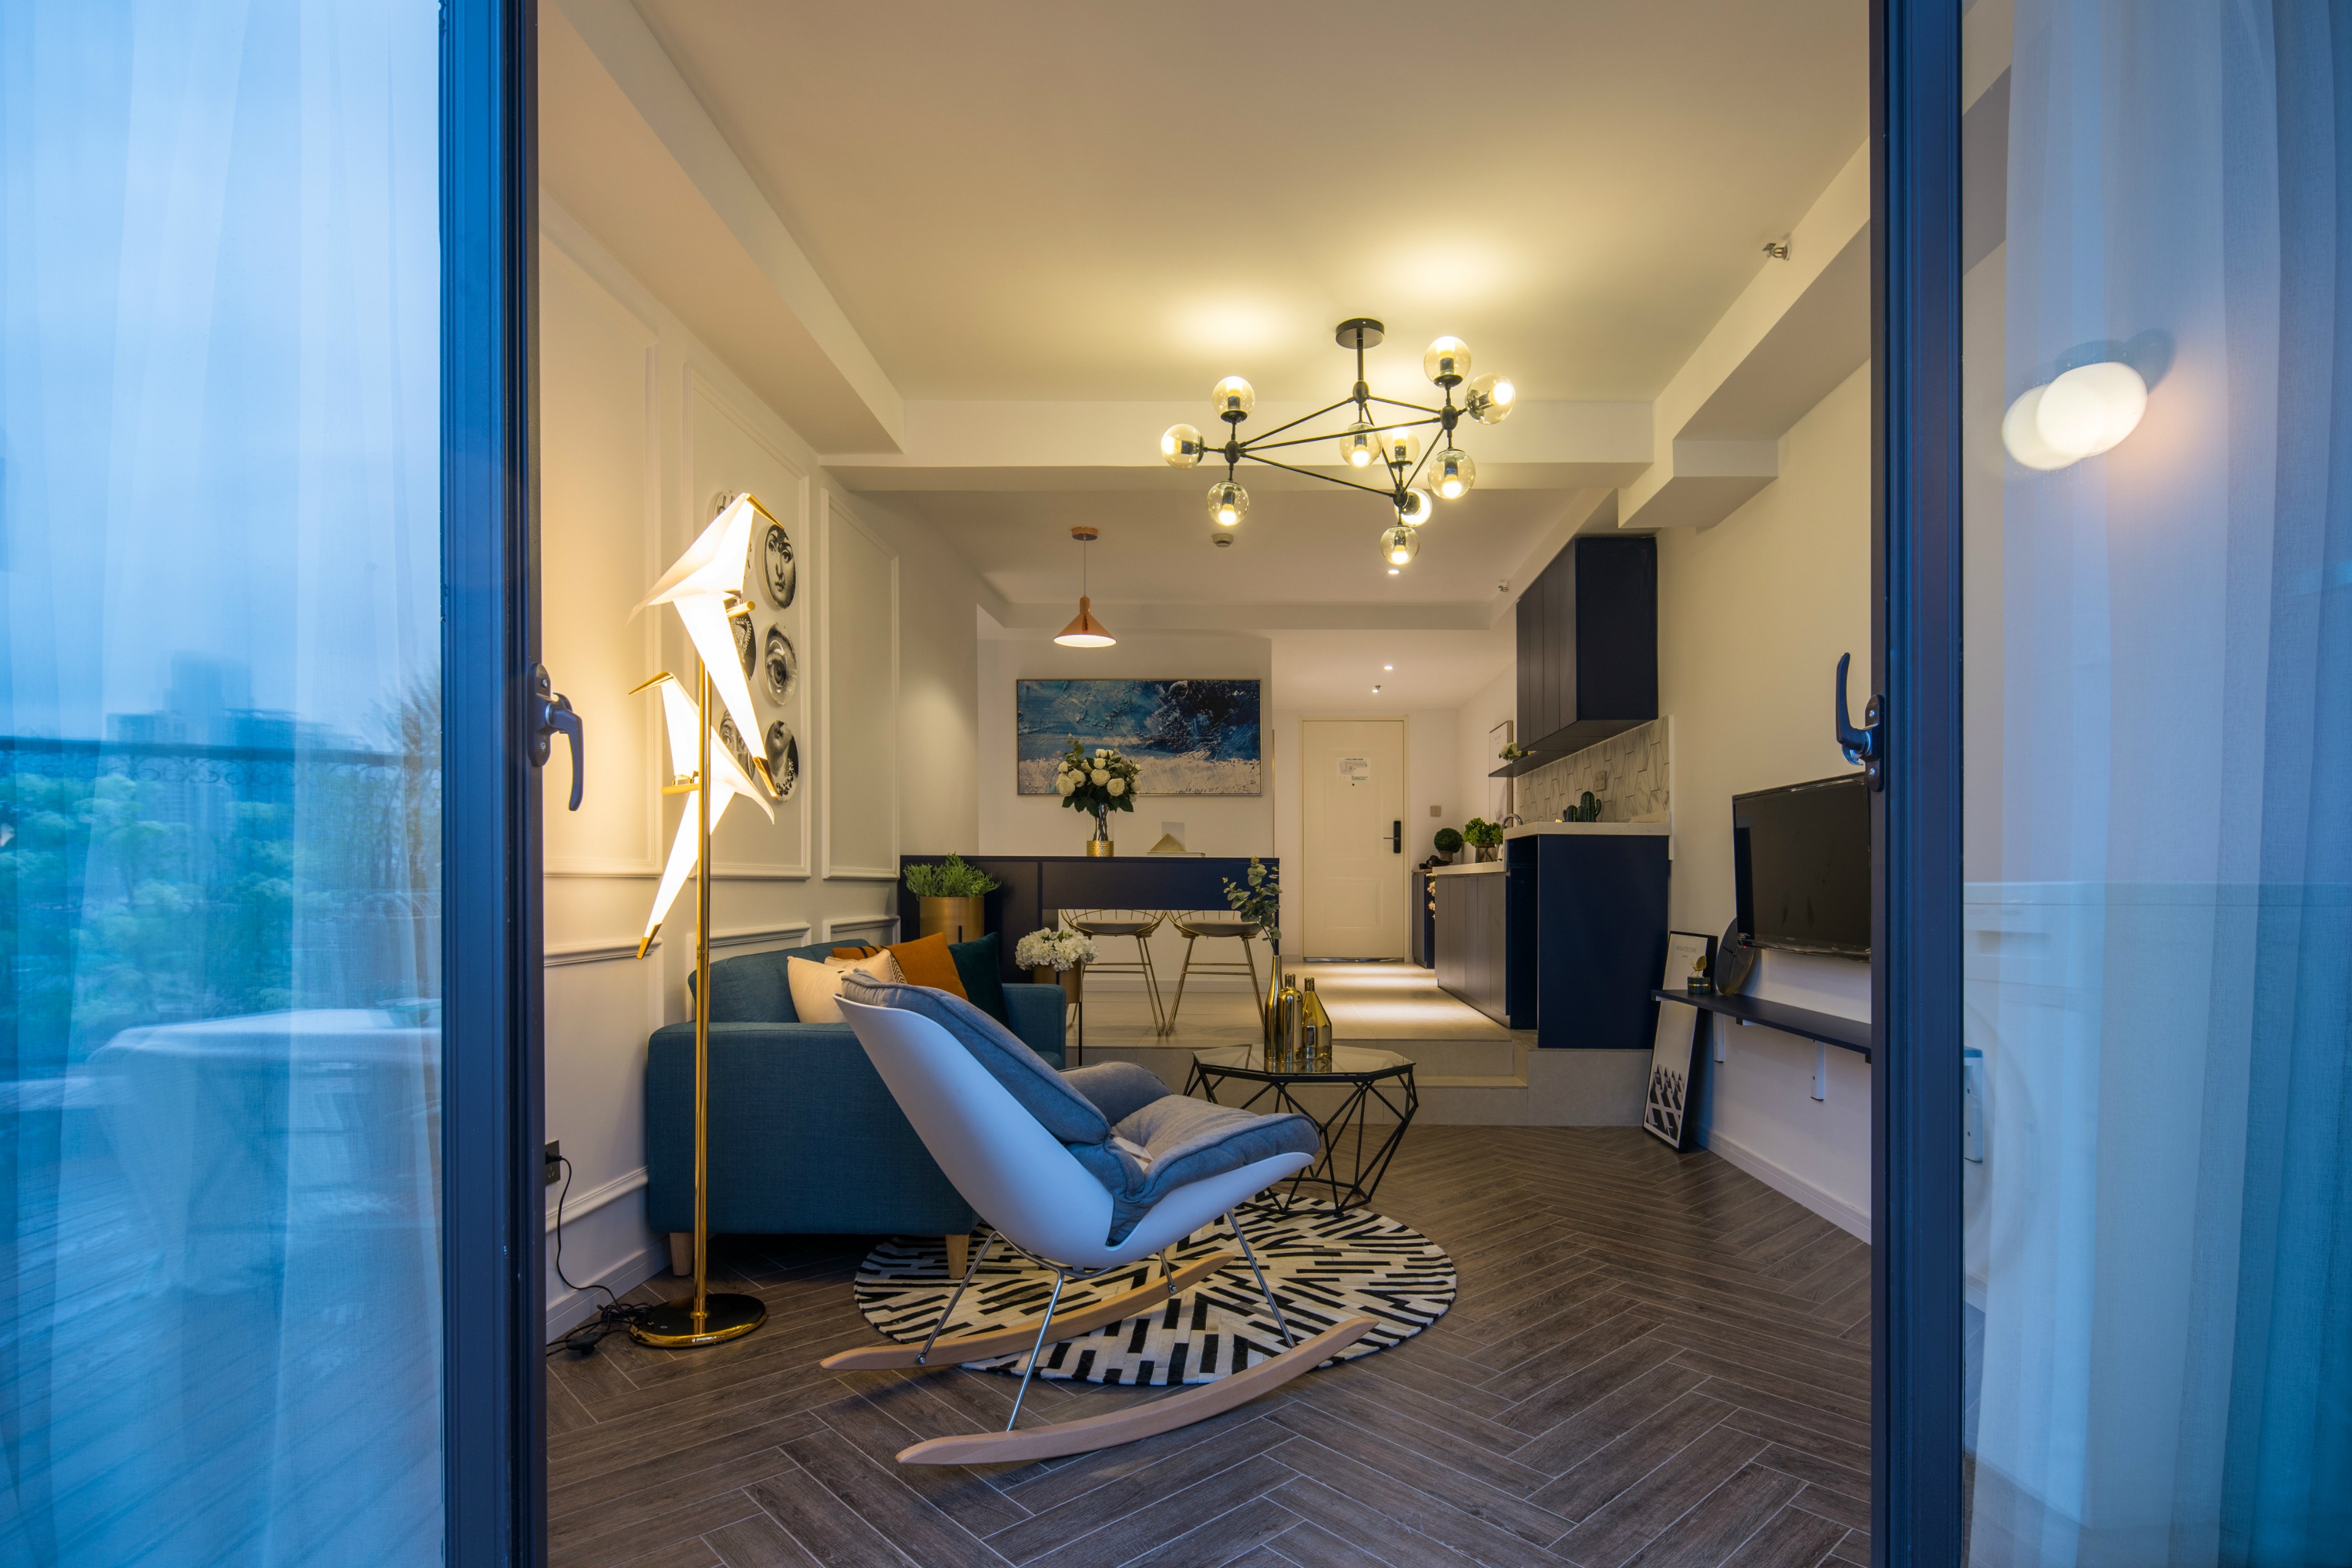 Looking inside a typical Harbour “co-living” flat. Photo: handout